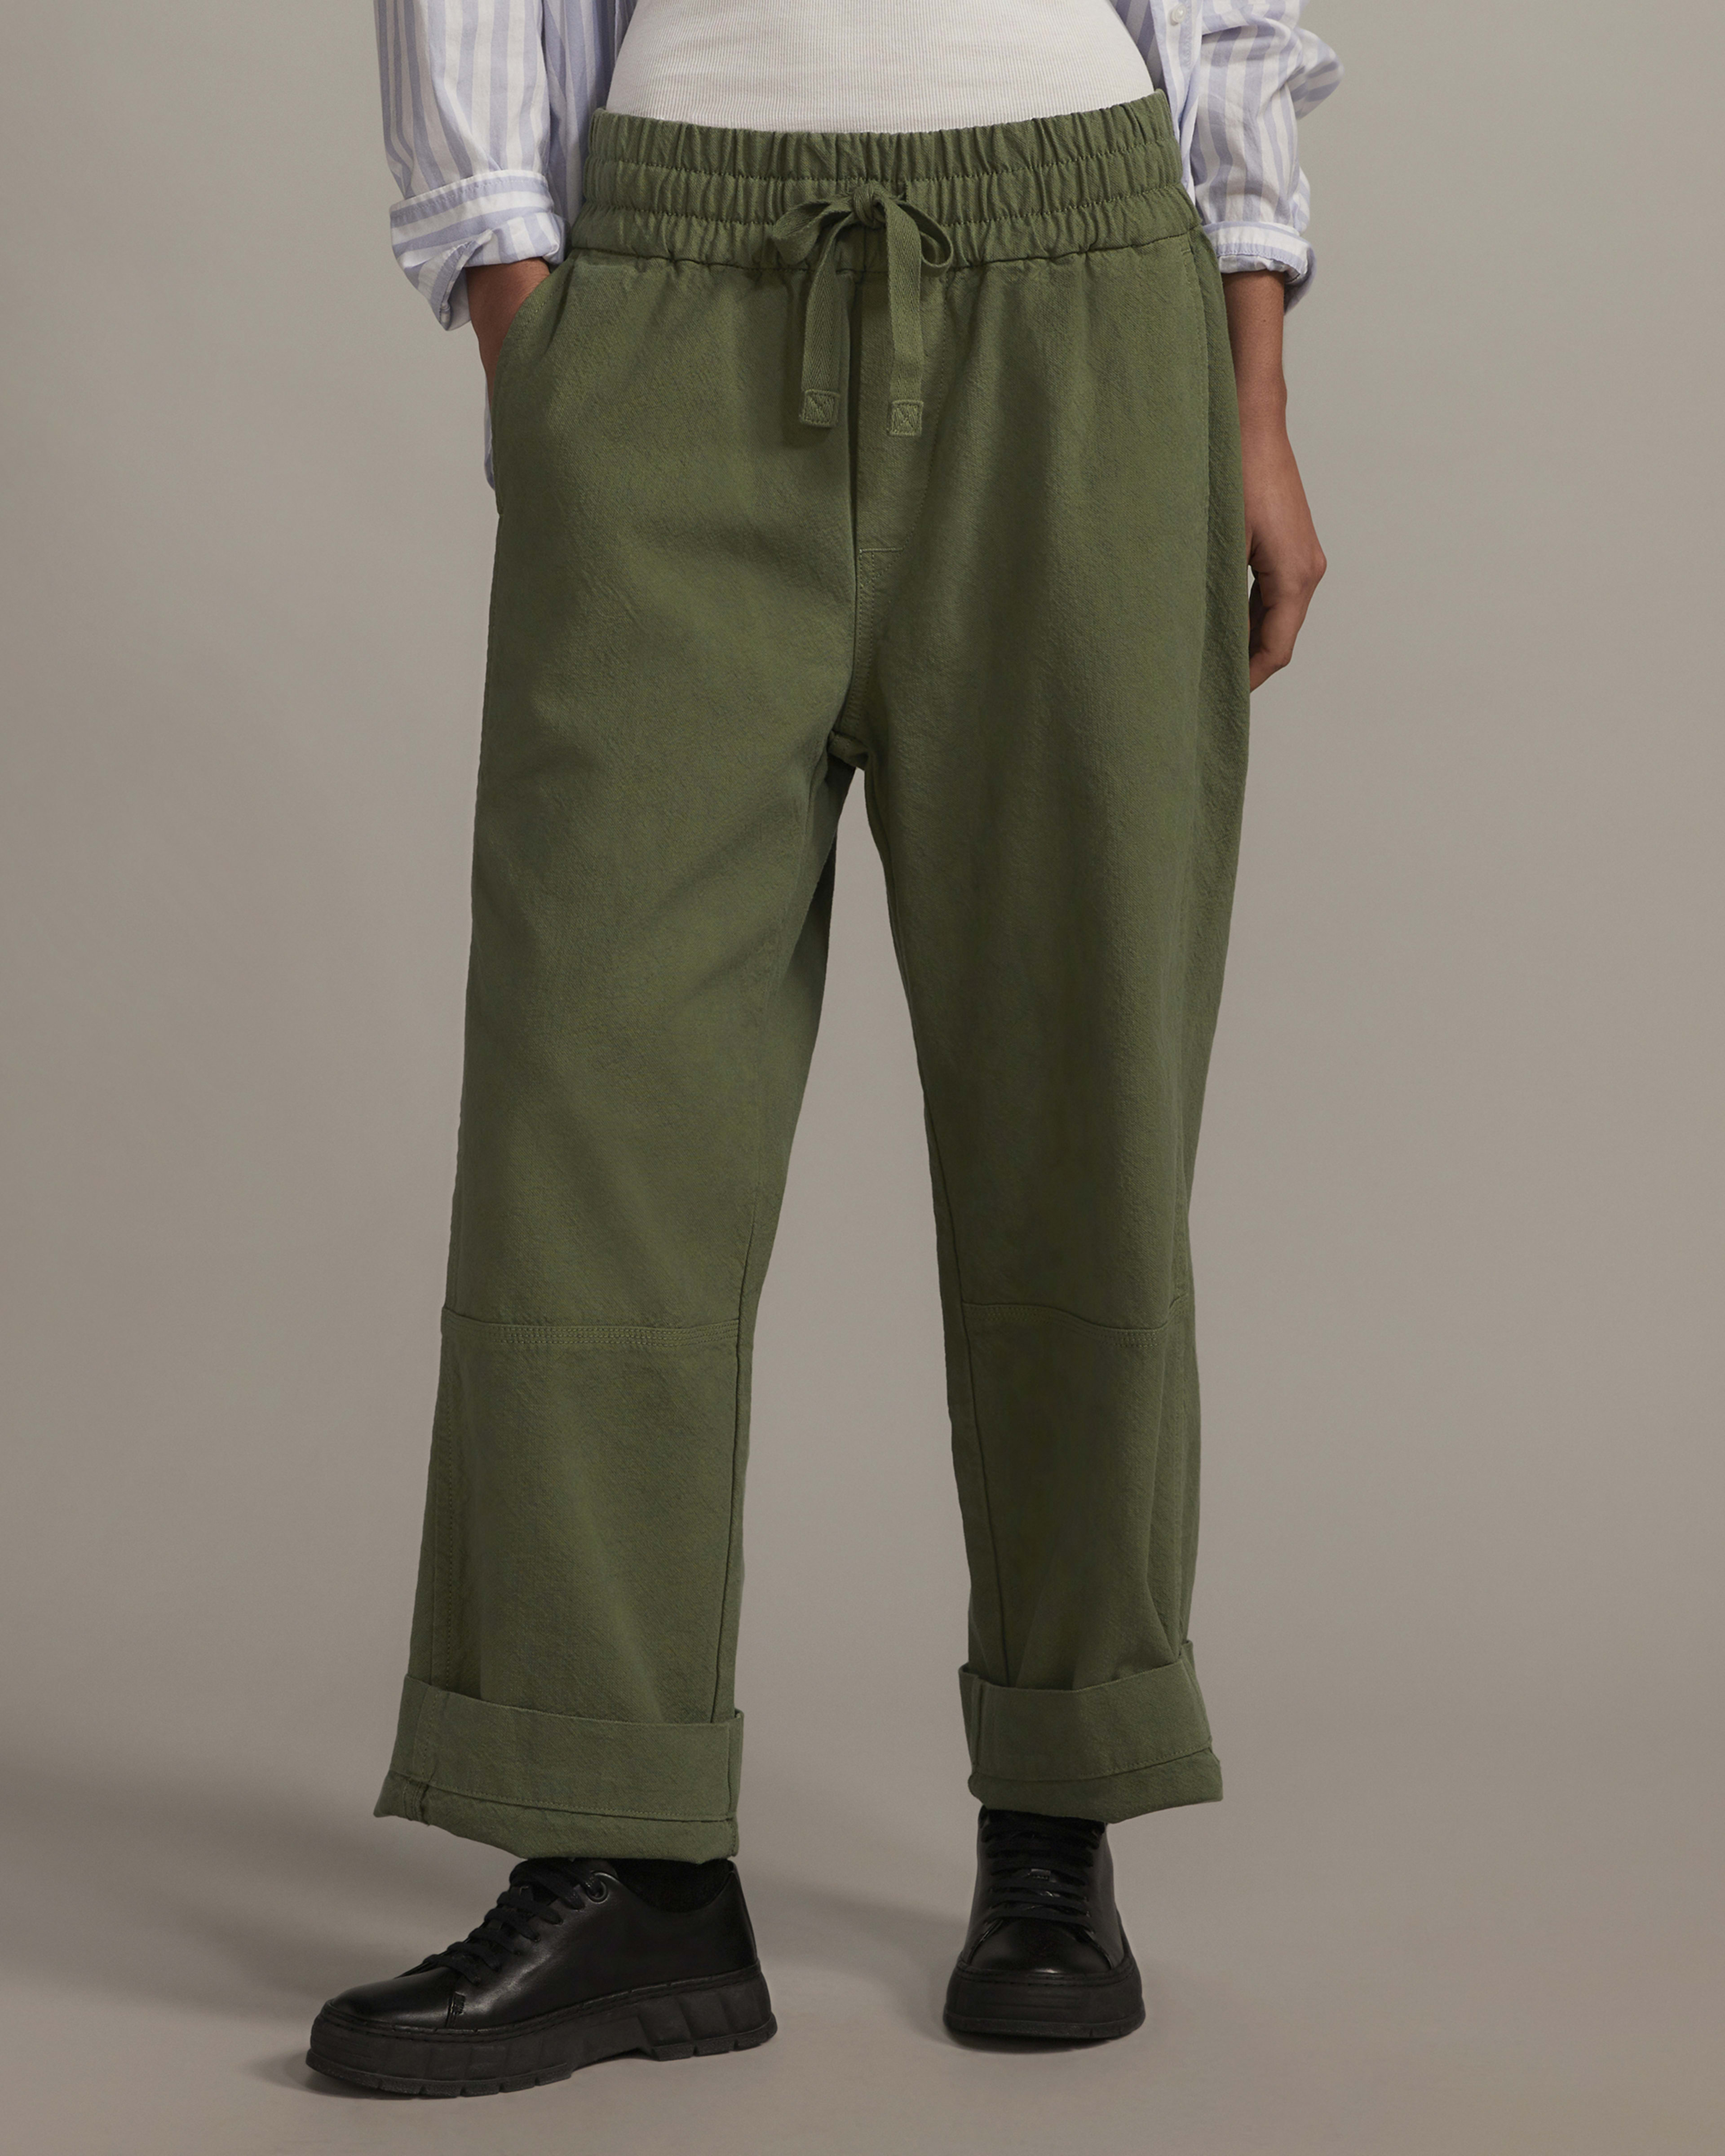 Women's Organic Cotton Vintage Wide Carpenter Pants in Washed